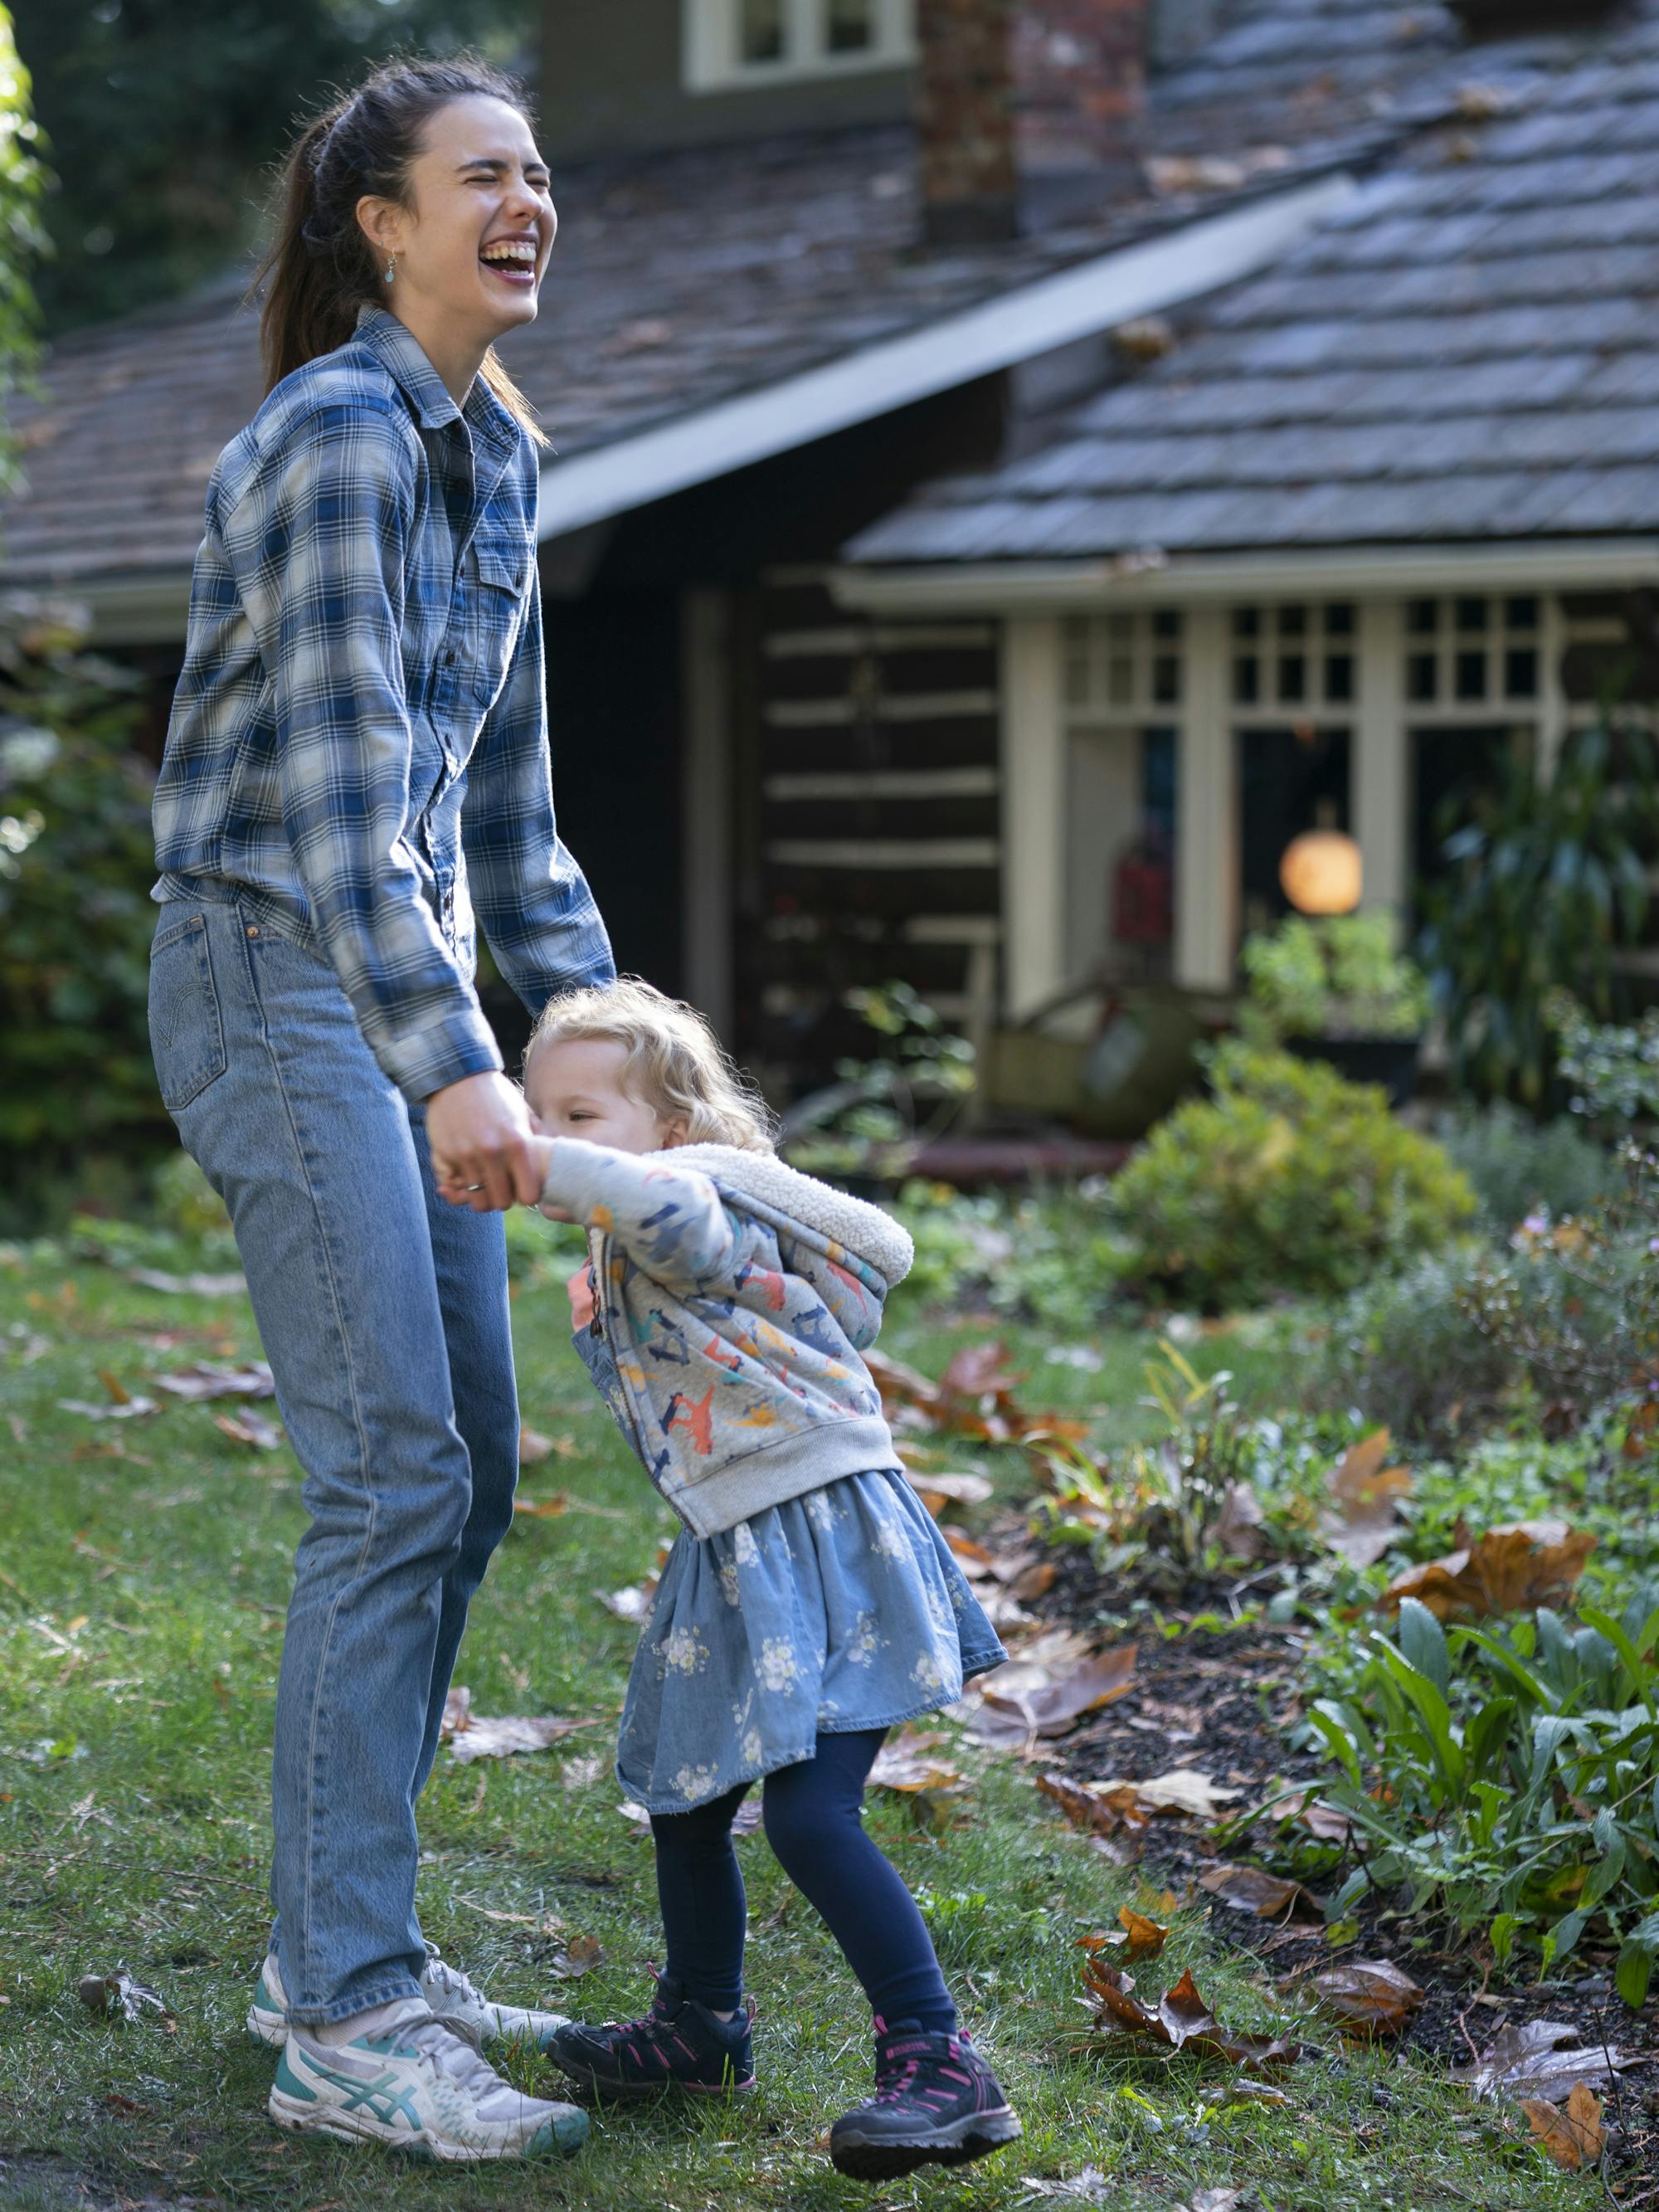 Alex Russell (Margaret Qualley) and Maddy Boyd (Rylea Nevaeh Whittet) giggle in the lawn outside a house.